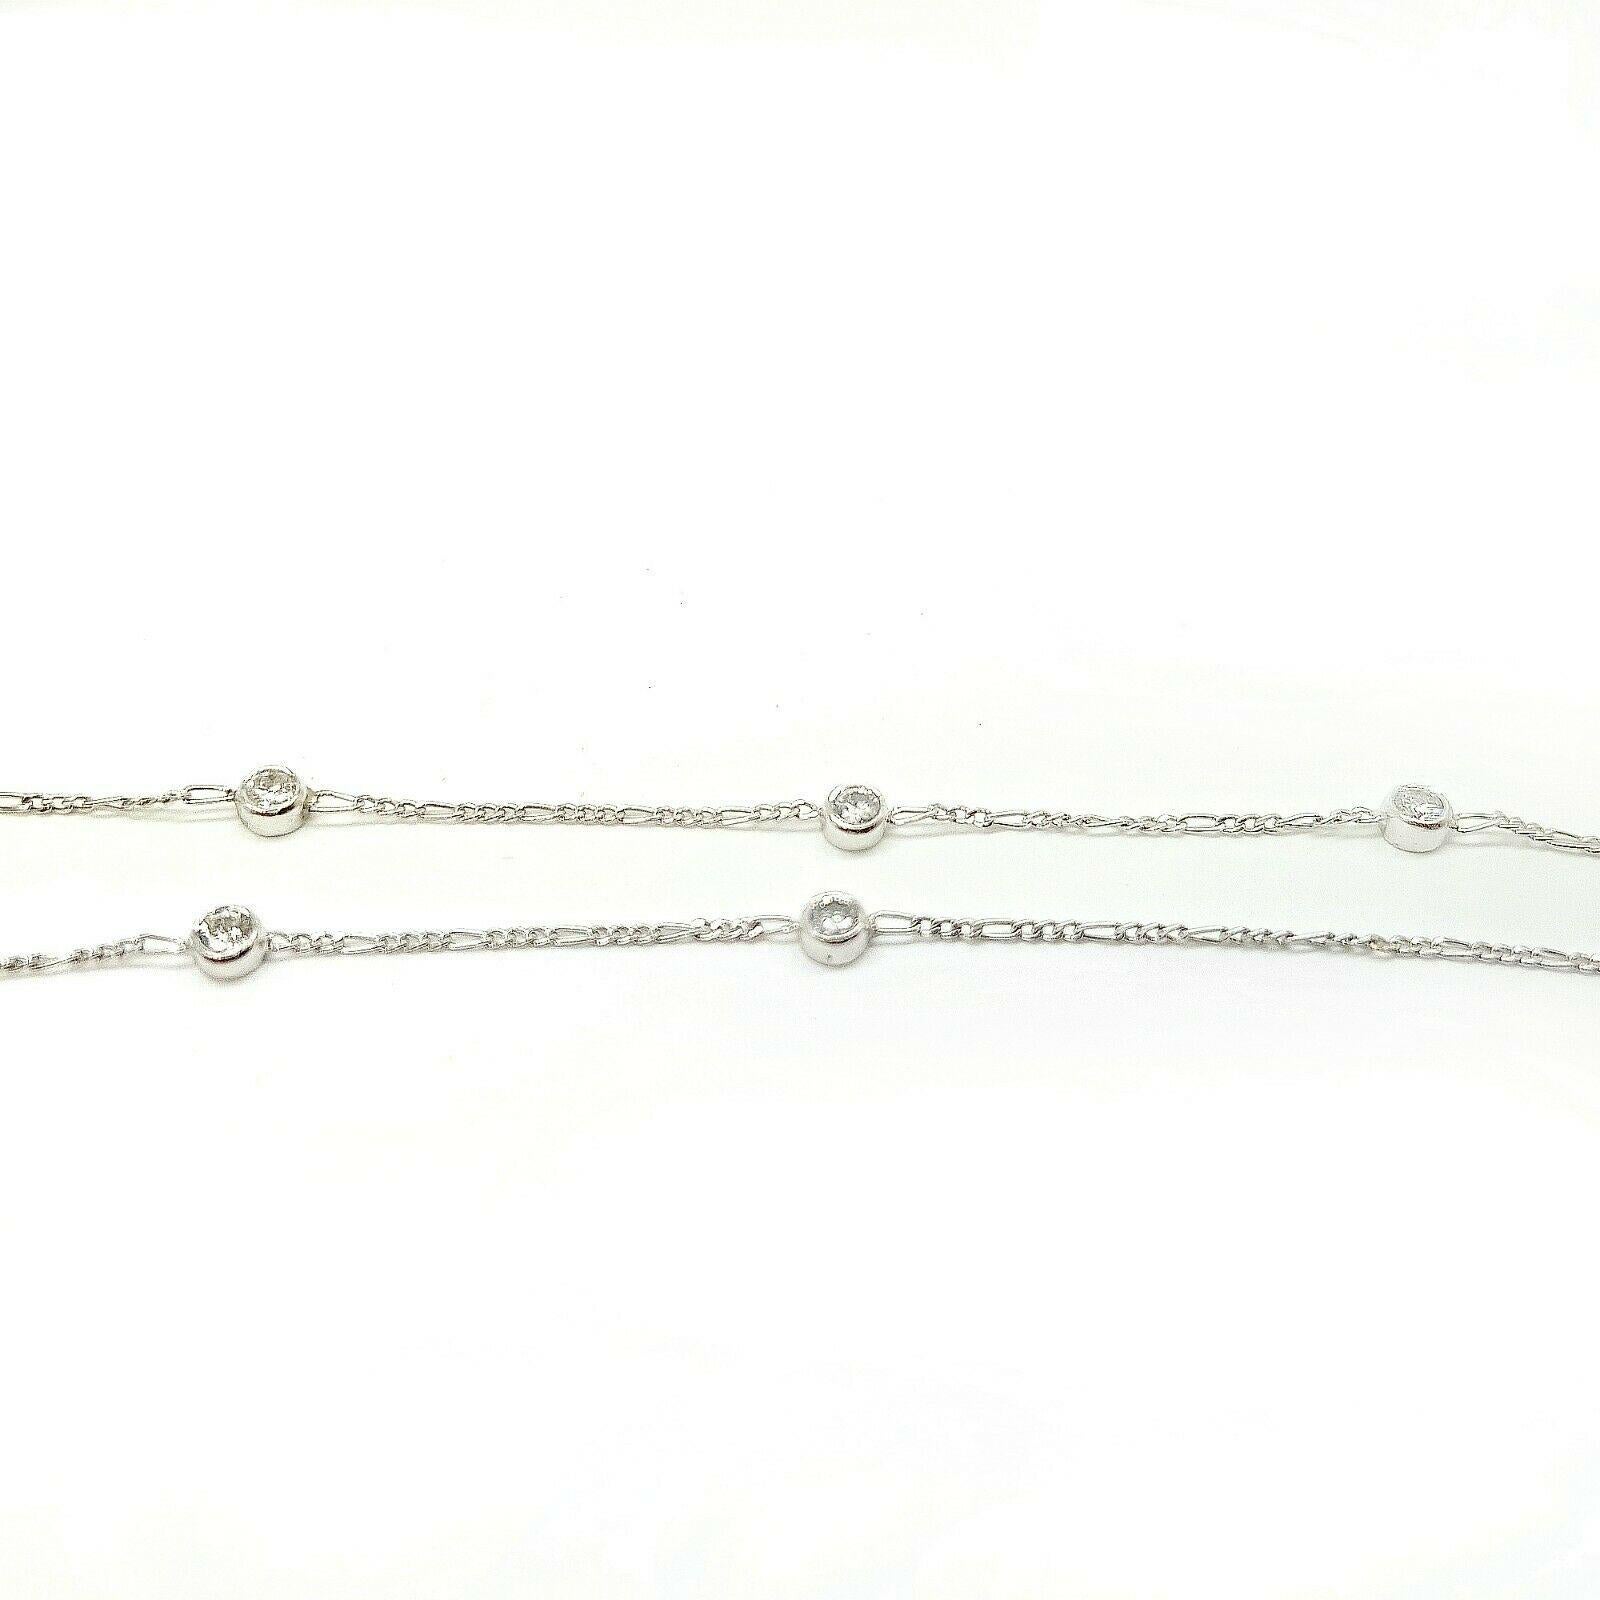  Specifications:
    type: Diamonds by the yard necklace
    metal: PLATINUM
    purity: 900
    LENGTH: 16